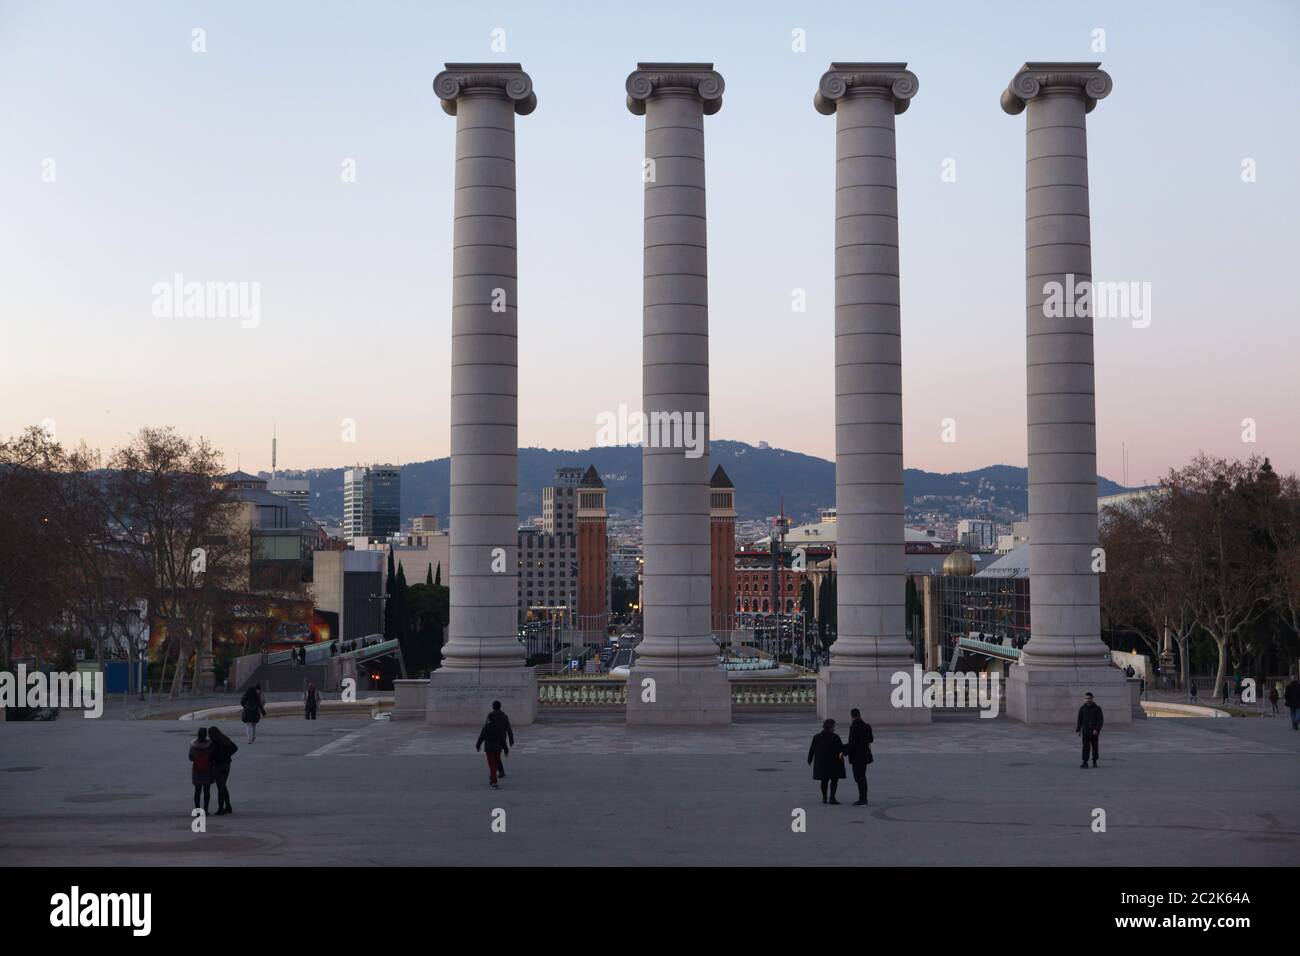 The Four Columns (Les Quatre Columnes) in Avinguda Maria Cristina in Montjuïc in Barcelona, Catalonia, Spain. The Four Columns designed by Catalan modernist architect Josep Puig i Cadafalch were erected in 1919, demolished in 1928 and erected again by Spanish sculptor Andreu Alfaro in 1999. The Venetian Towers (Torres Venecianes) on Plaça d'Espanya are seen in the background. Stock Photo